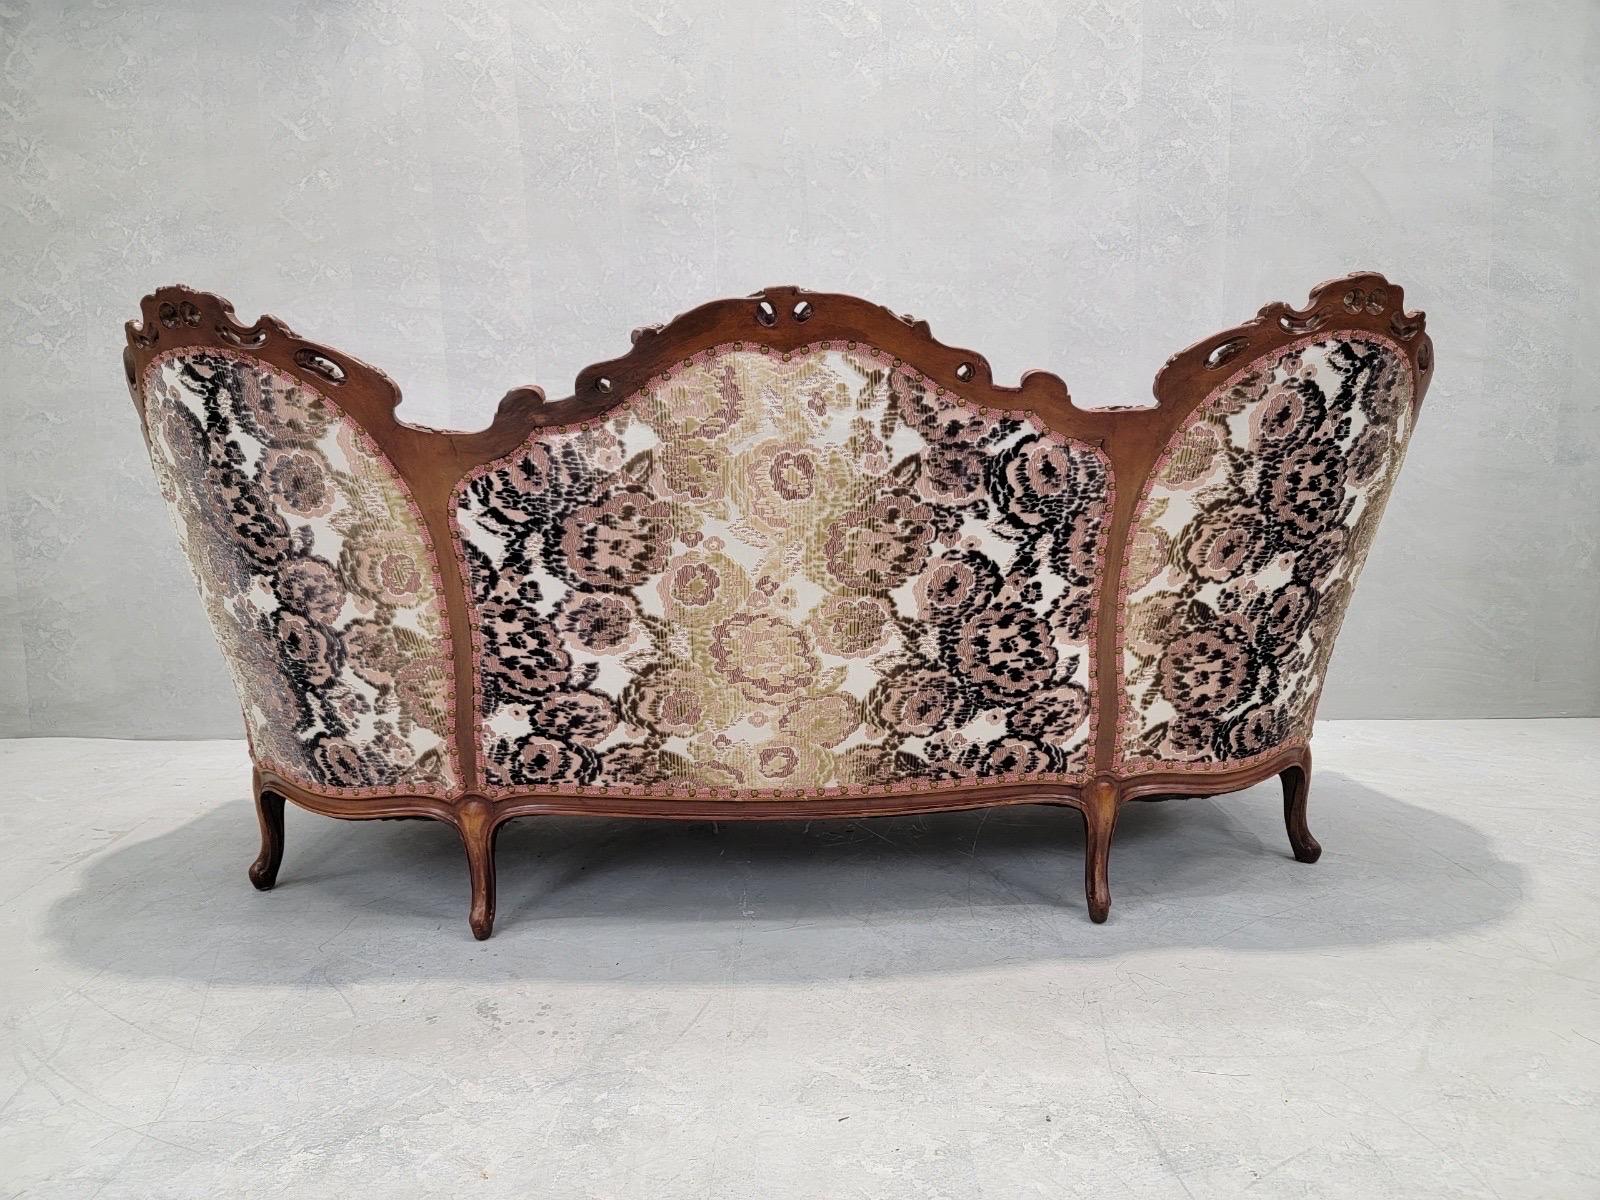 Carved Antique French Victorian Walnut Tufted Back Bergere Sofa Newly Upholstered For Sale